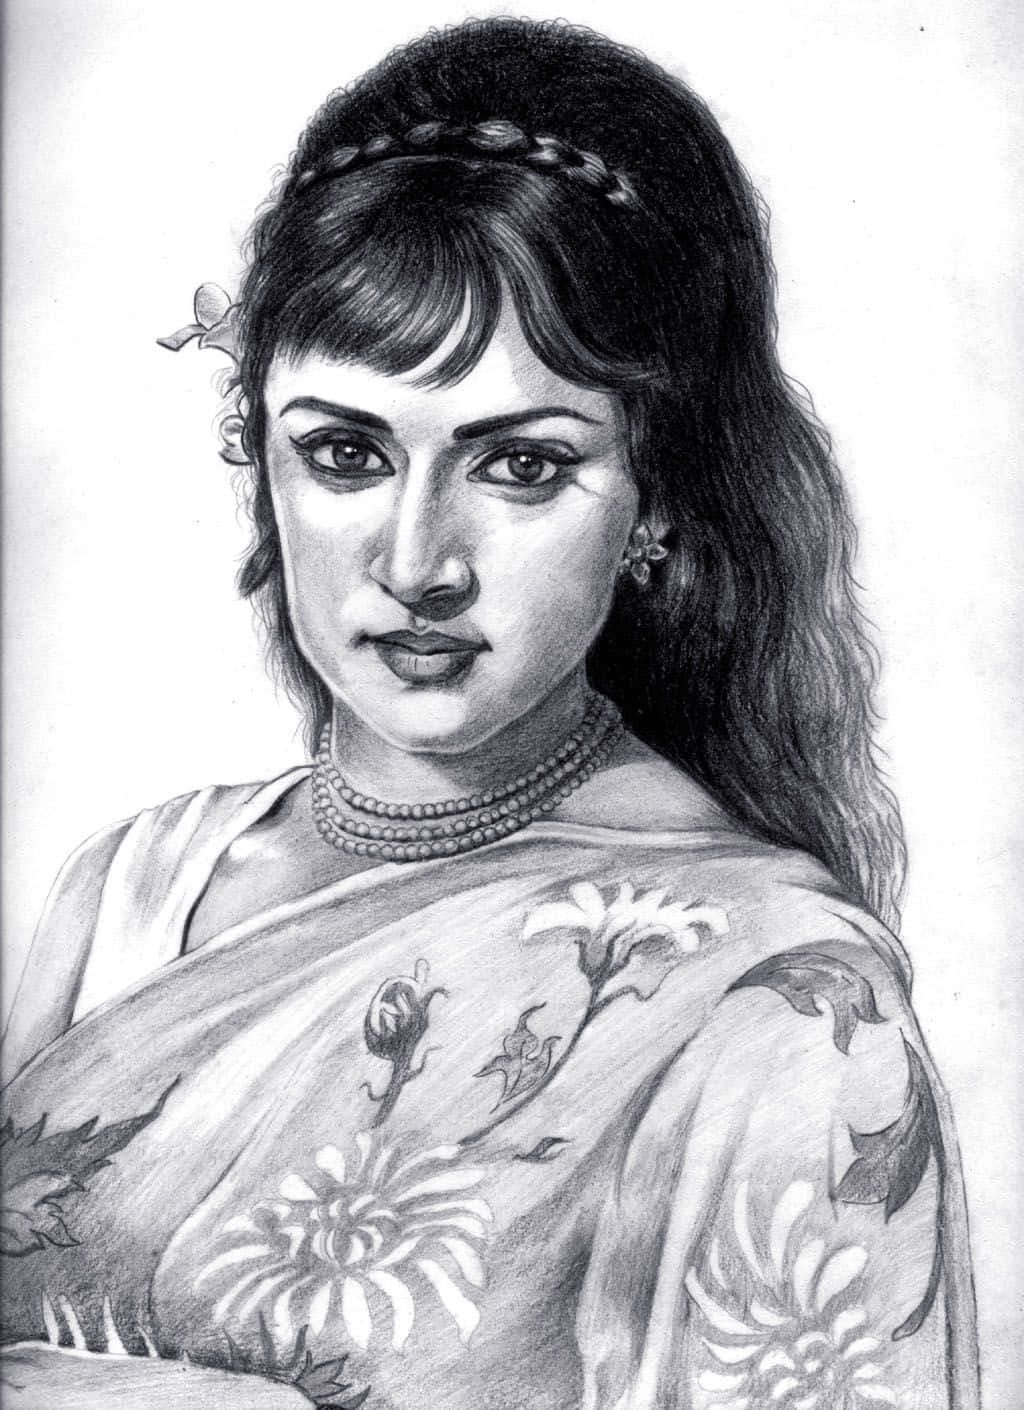 A Drawing Of An Indian Woman In A Sari